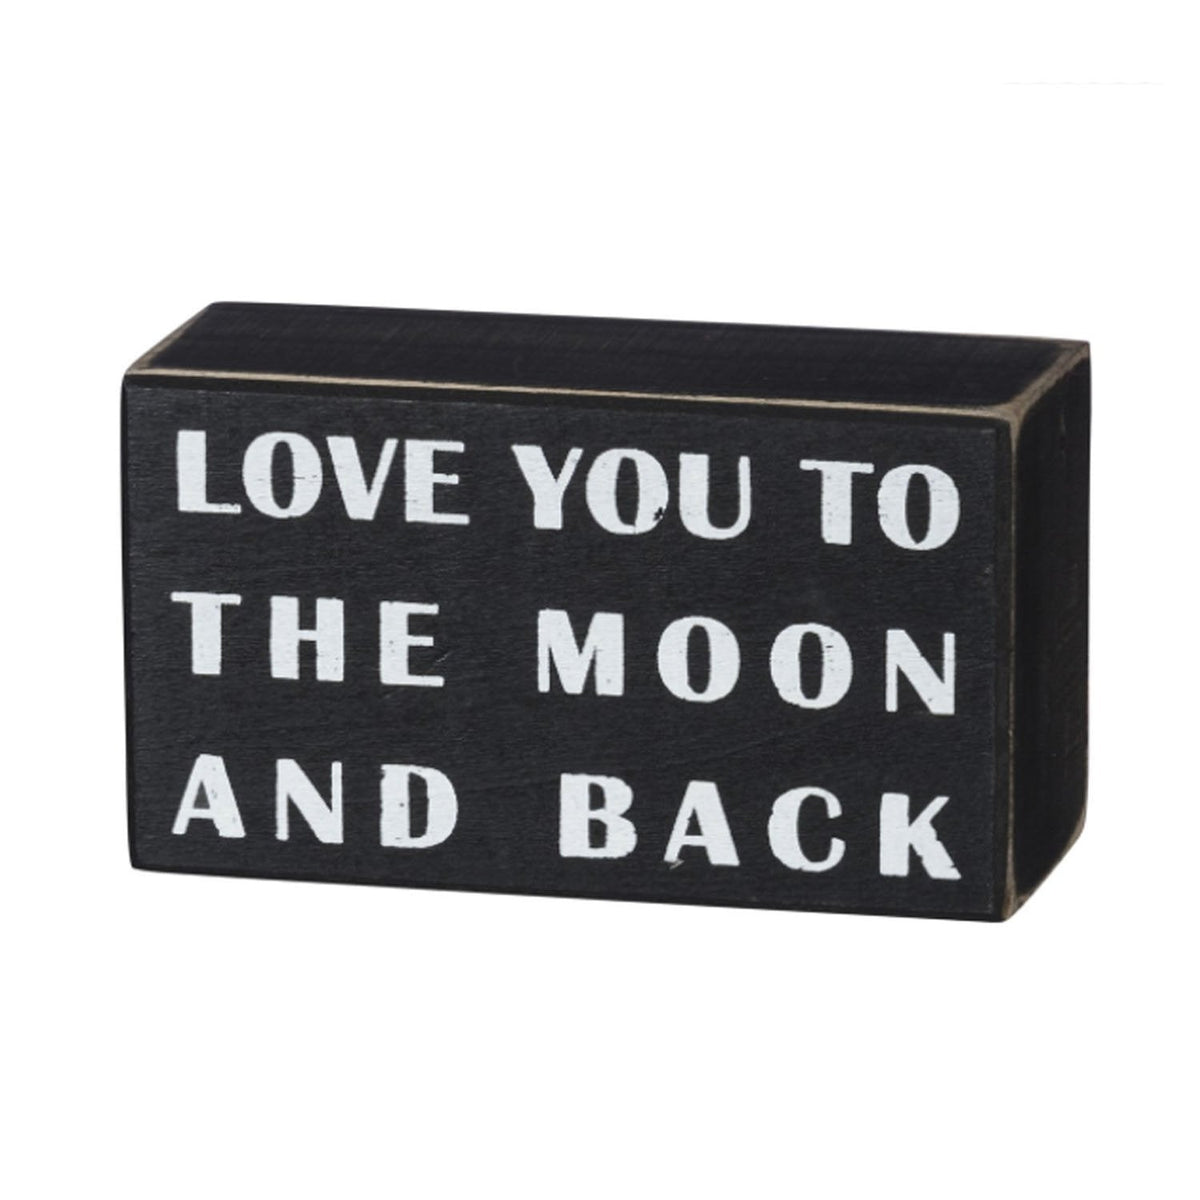 Love You to the Moon and Back Box Sign - Signs & More